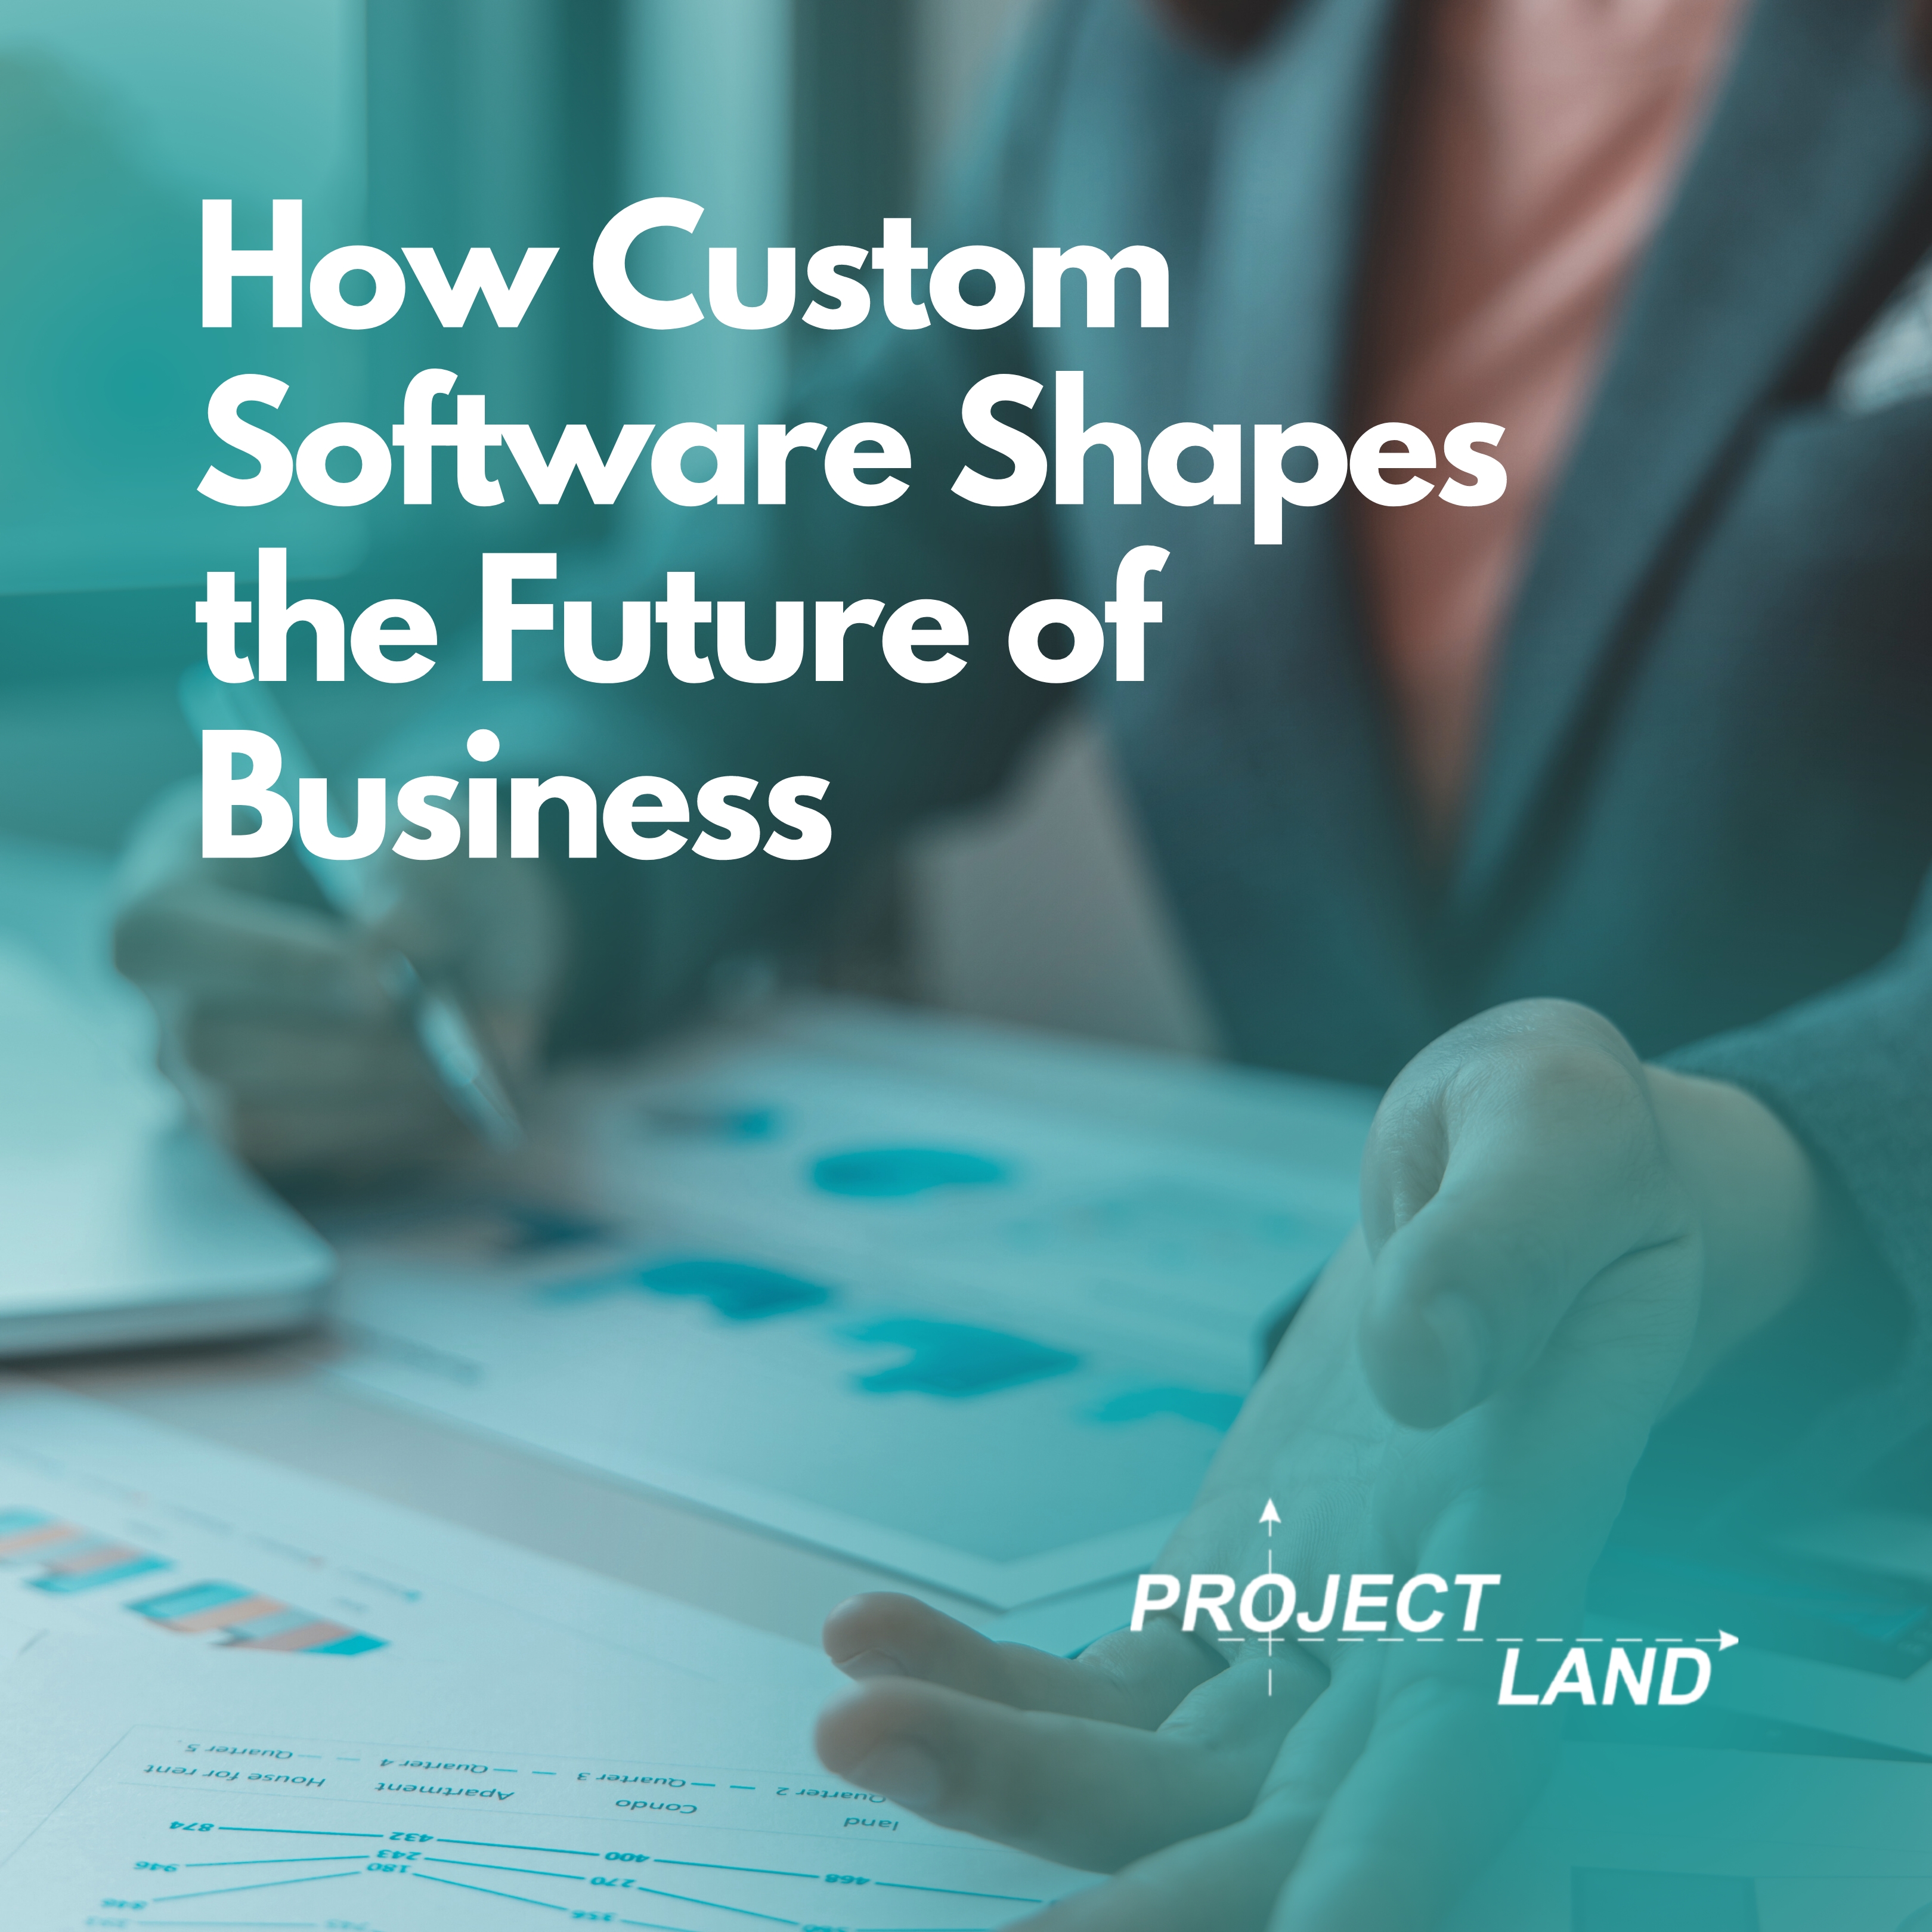 How Custom Software Shapes the Future of Business